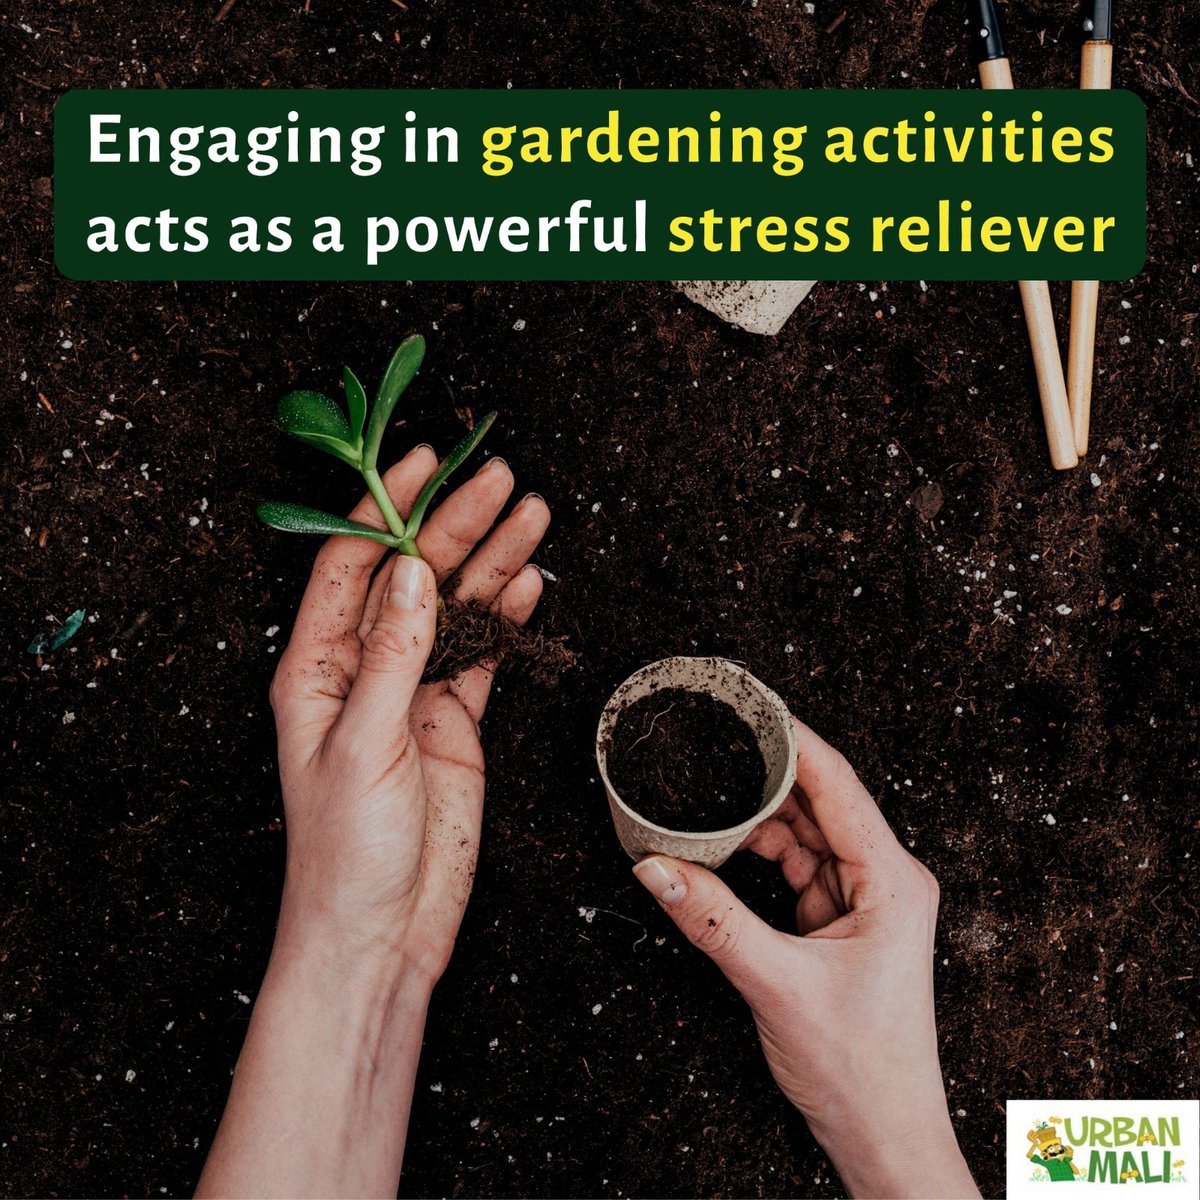 Gardening = Relaxation 🧘♂️🌿
Gardening is not just a hobby; it's a therapeutic escape into nature's calming embrace.

#GardeningTherapy #GreenSanctuary #NatureCalm #RelaxWithPlants #GardenLove #EscapeToNature#UrbanMali #urbangardening #homegardening